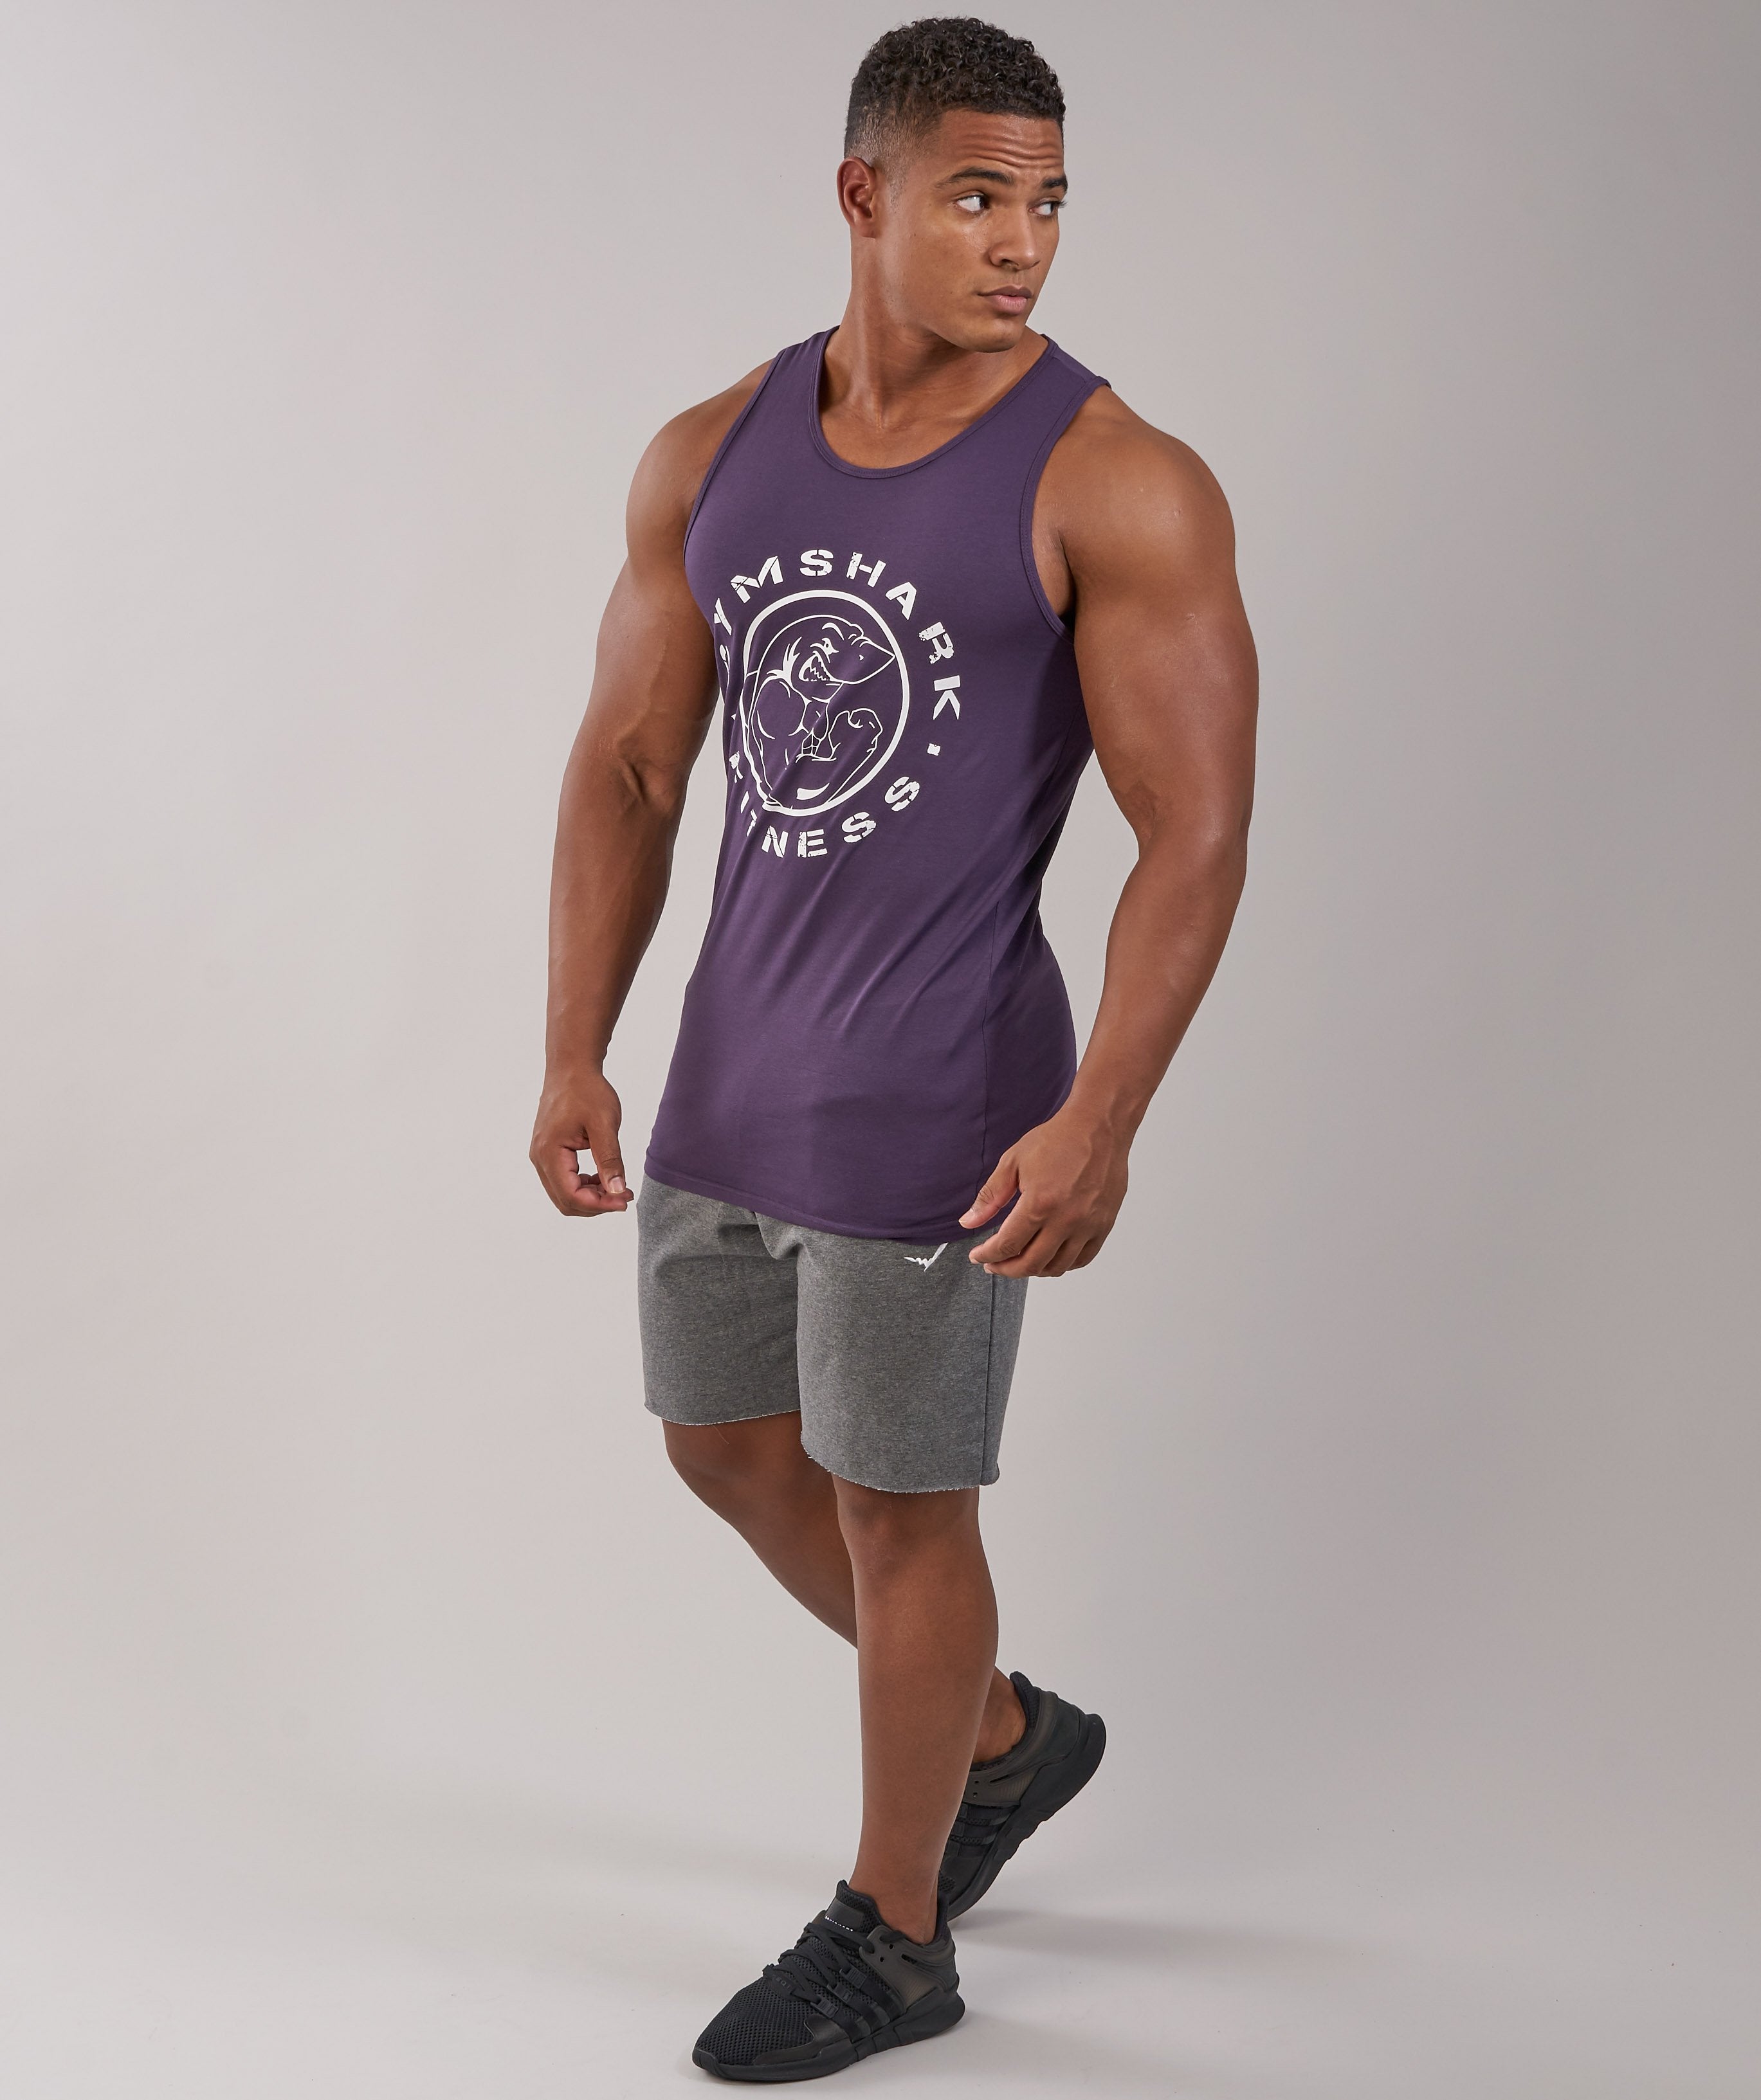 Fitness Tank in Nightshade Purple - view 4